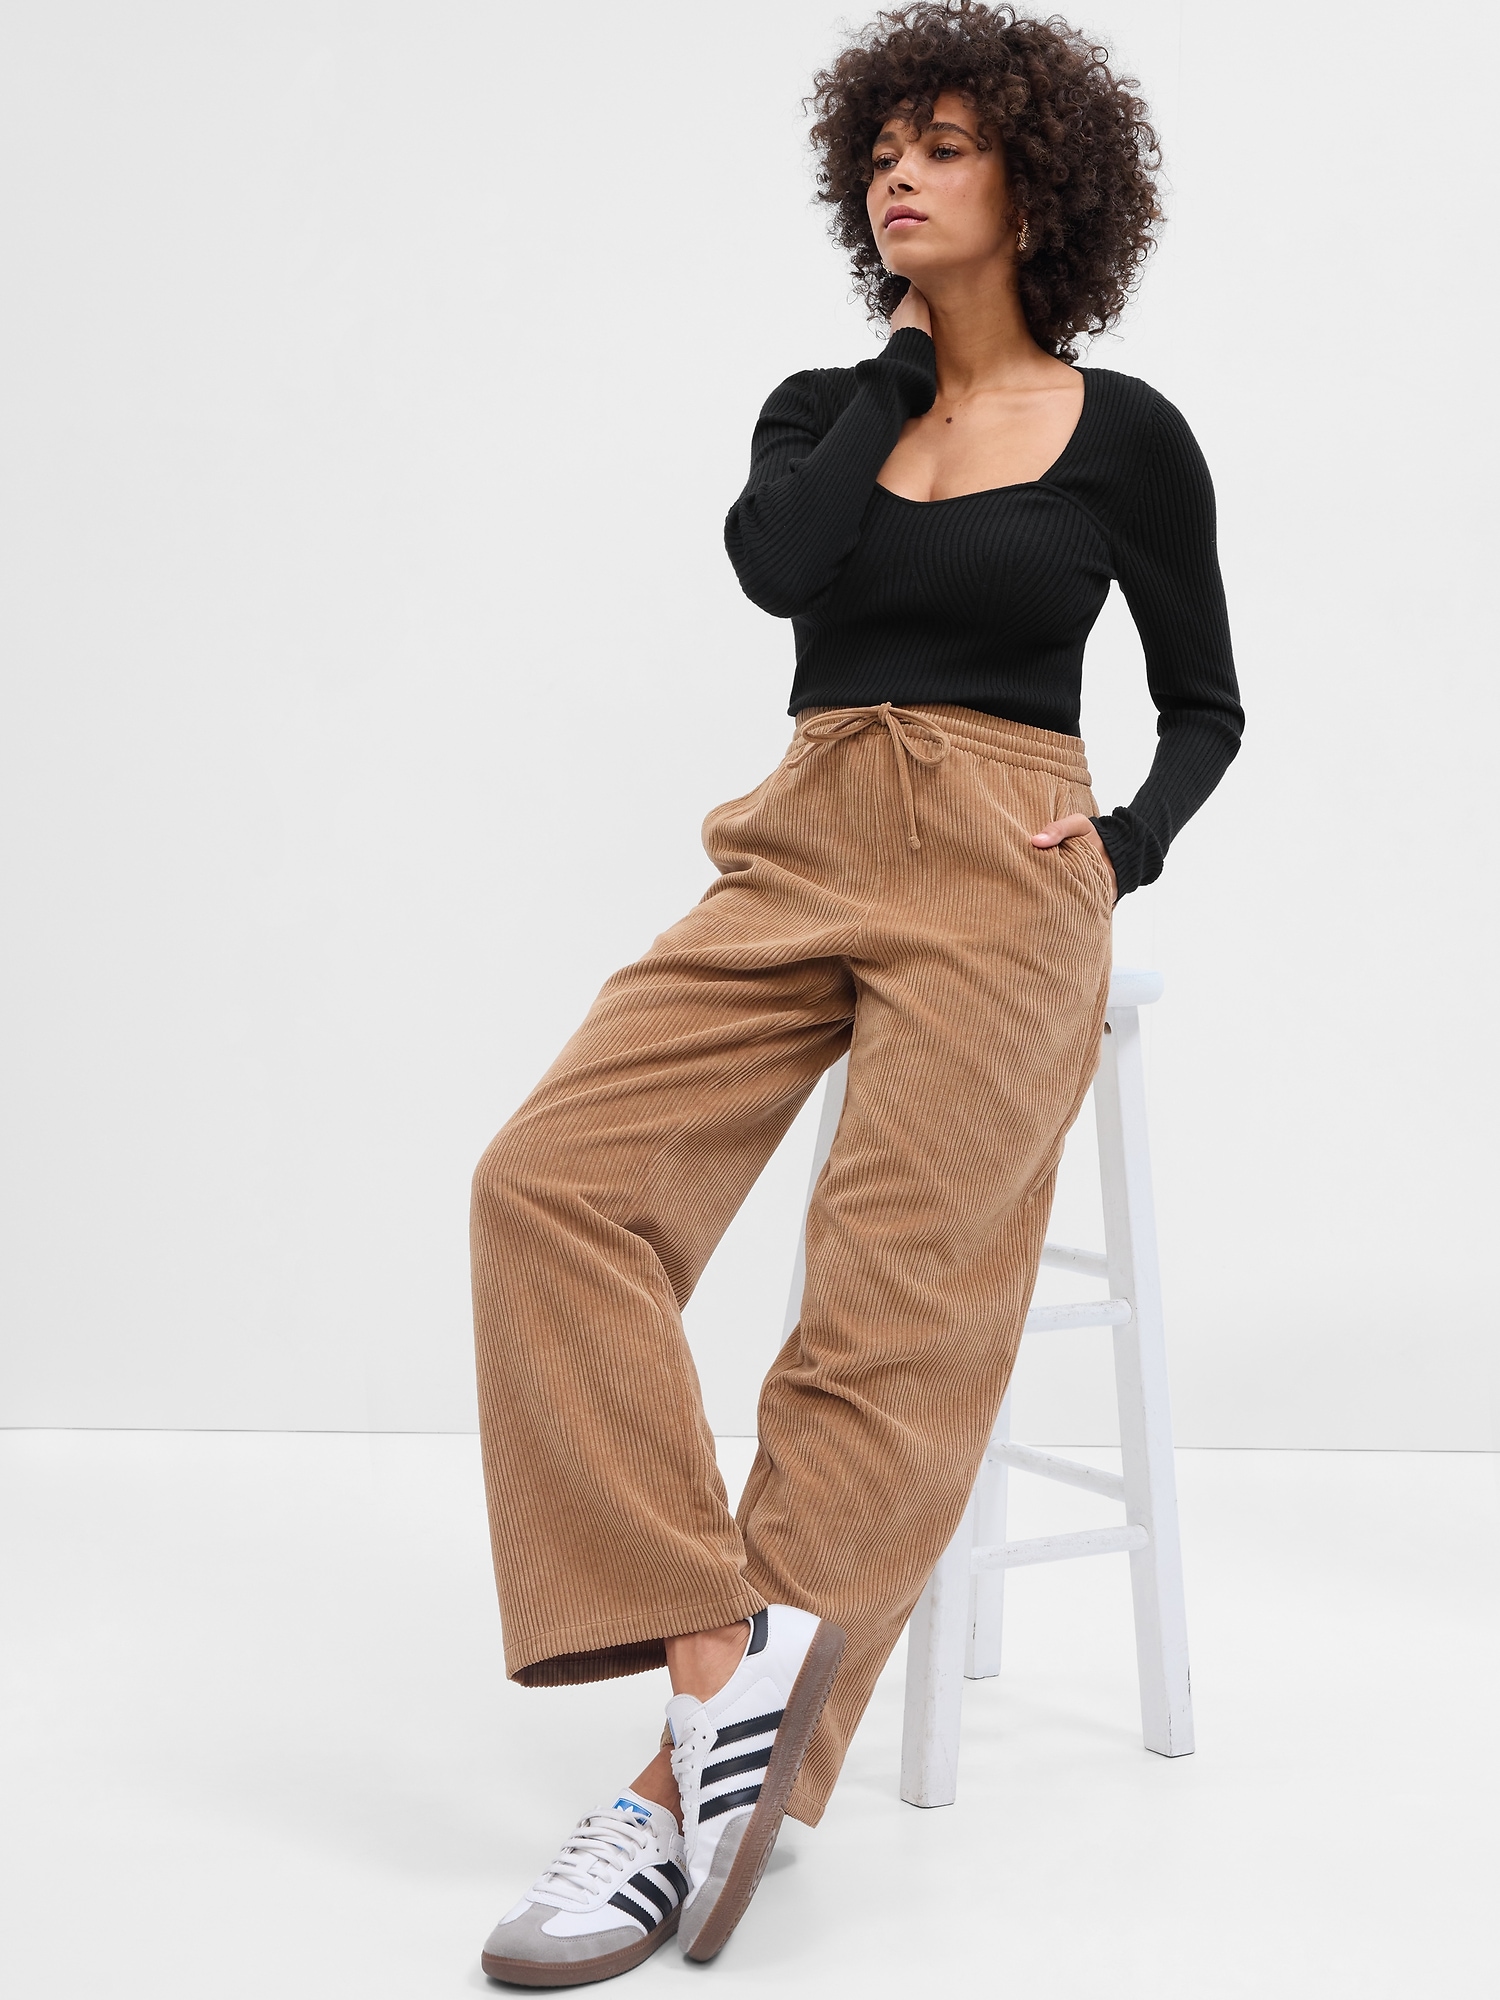 I Was Wrong About the Corduroy Pants Trend